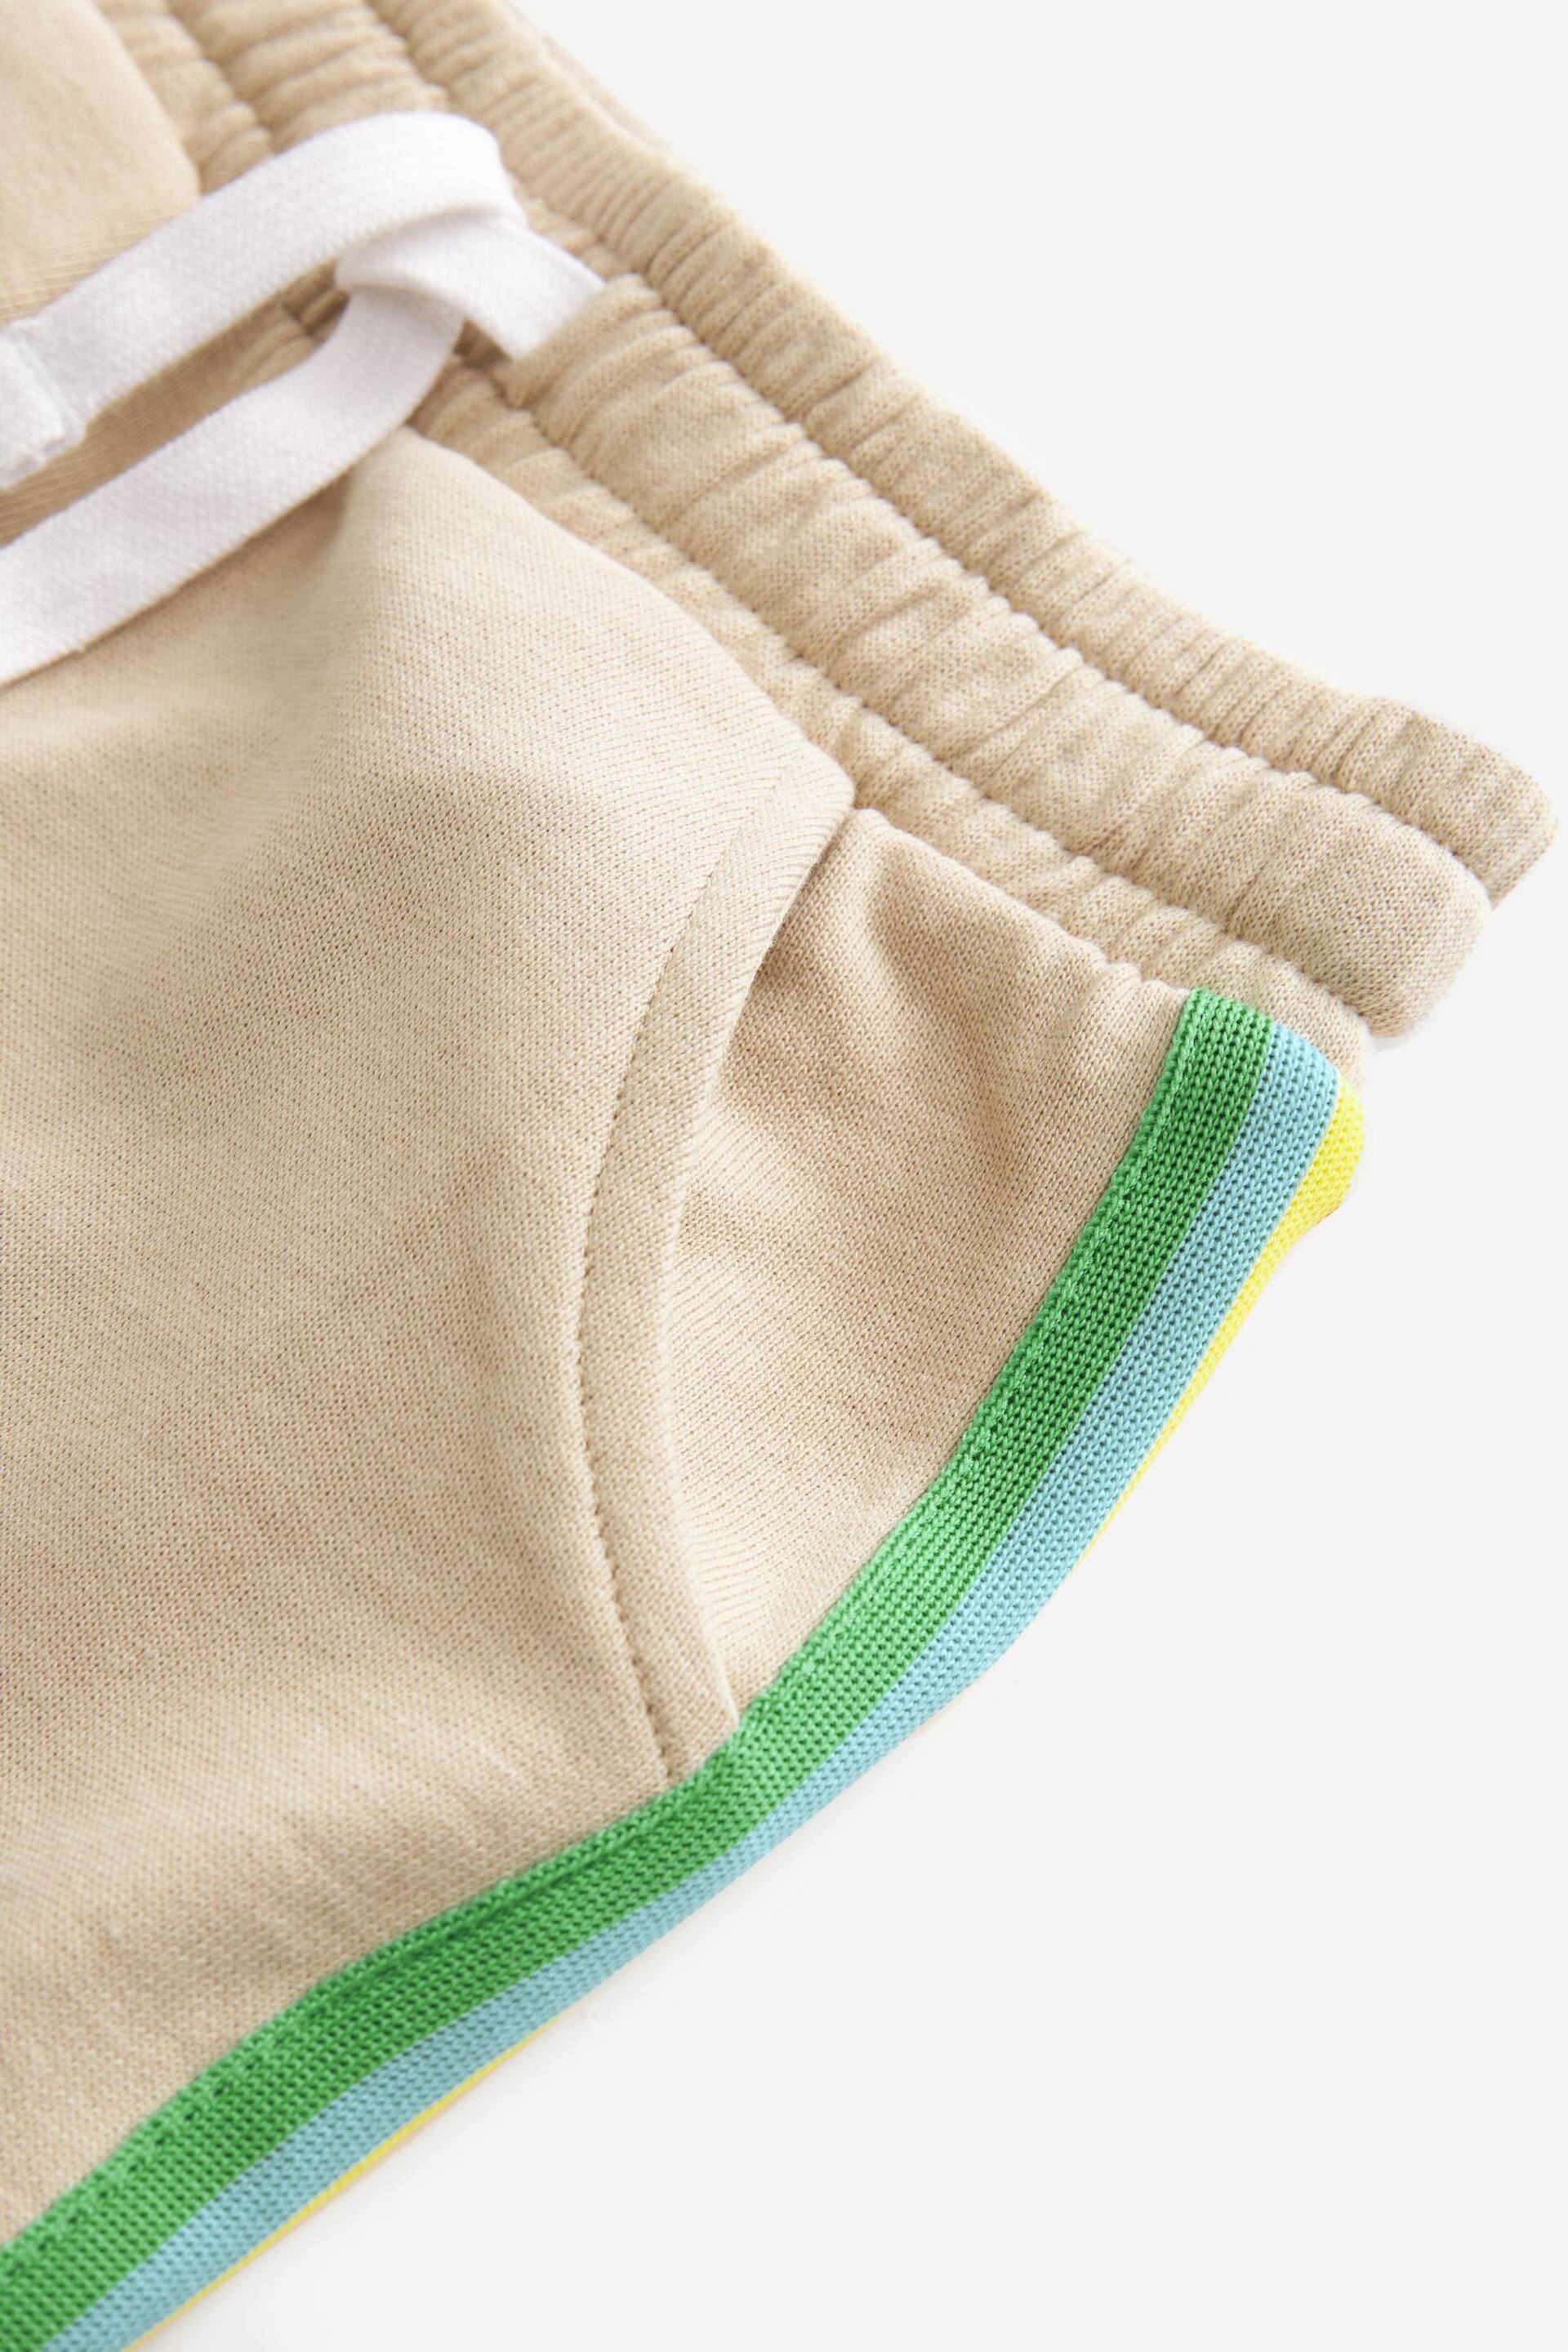 Little Bird by Jools Oliver Stone Rainbow Striped Joggers - Image 9 of 9